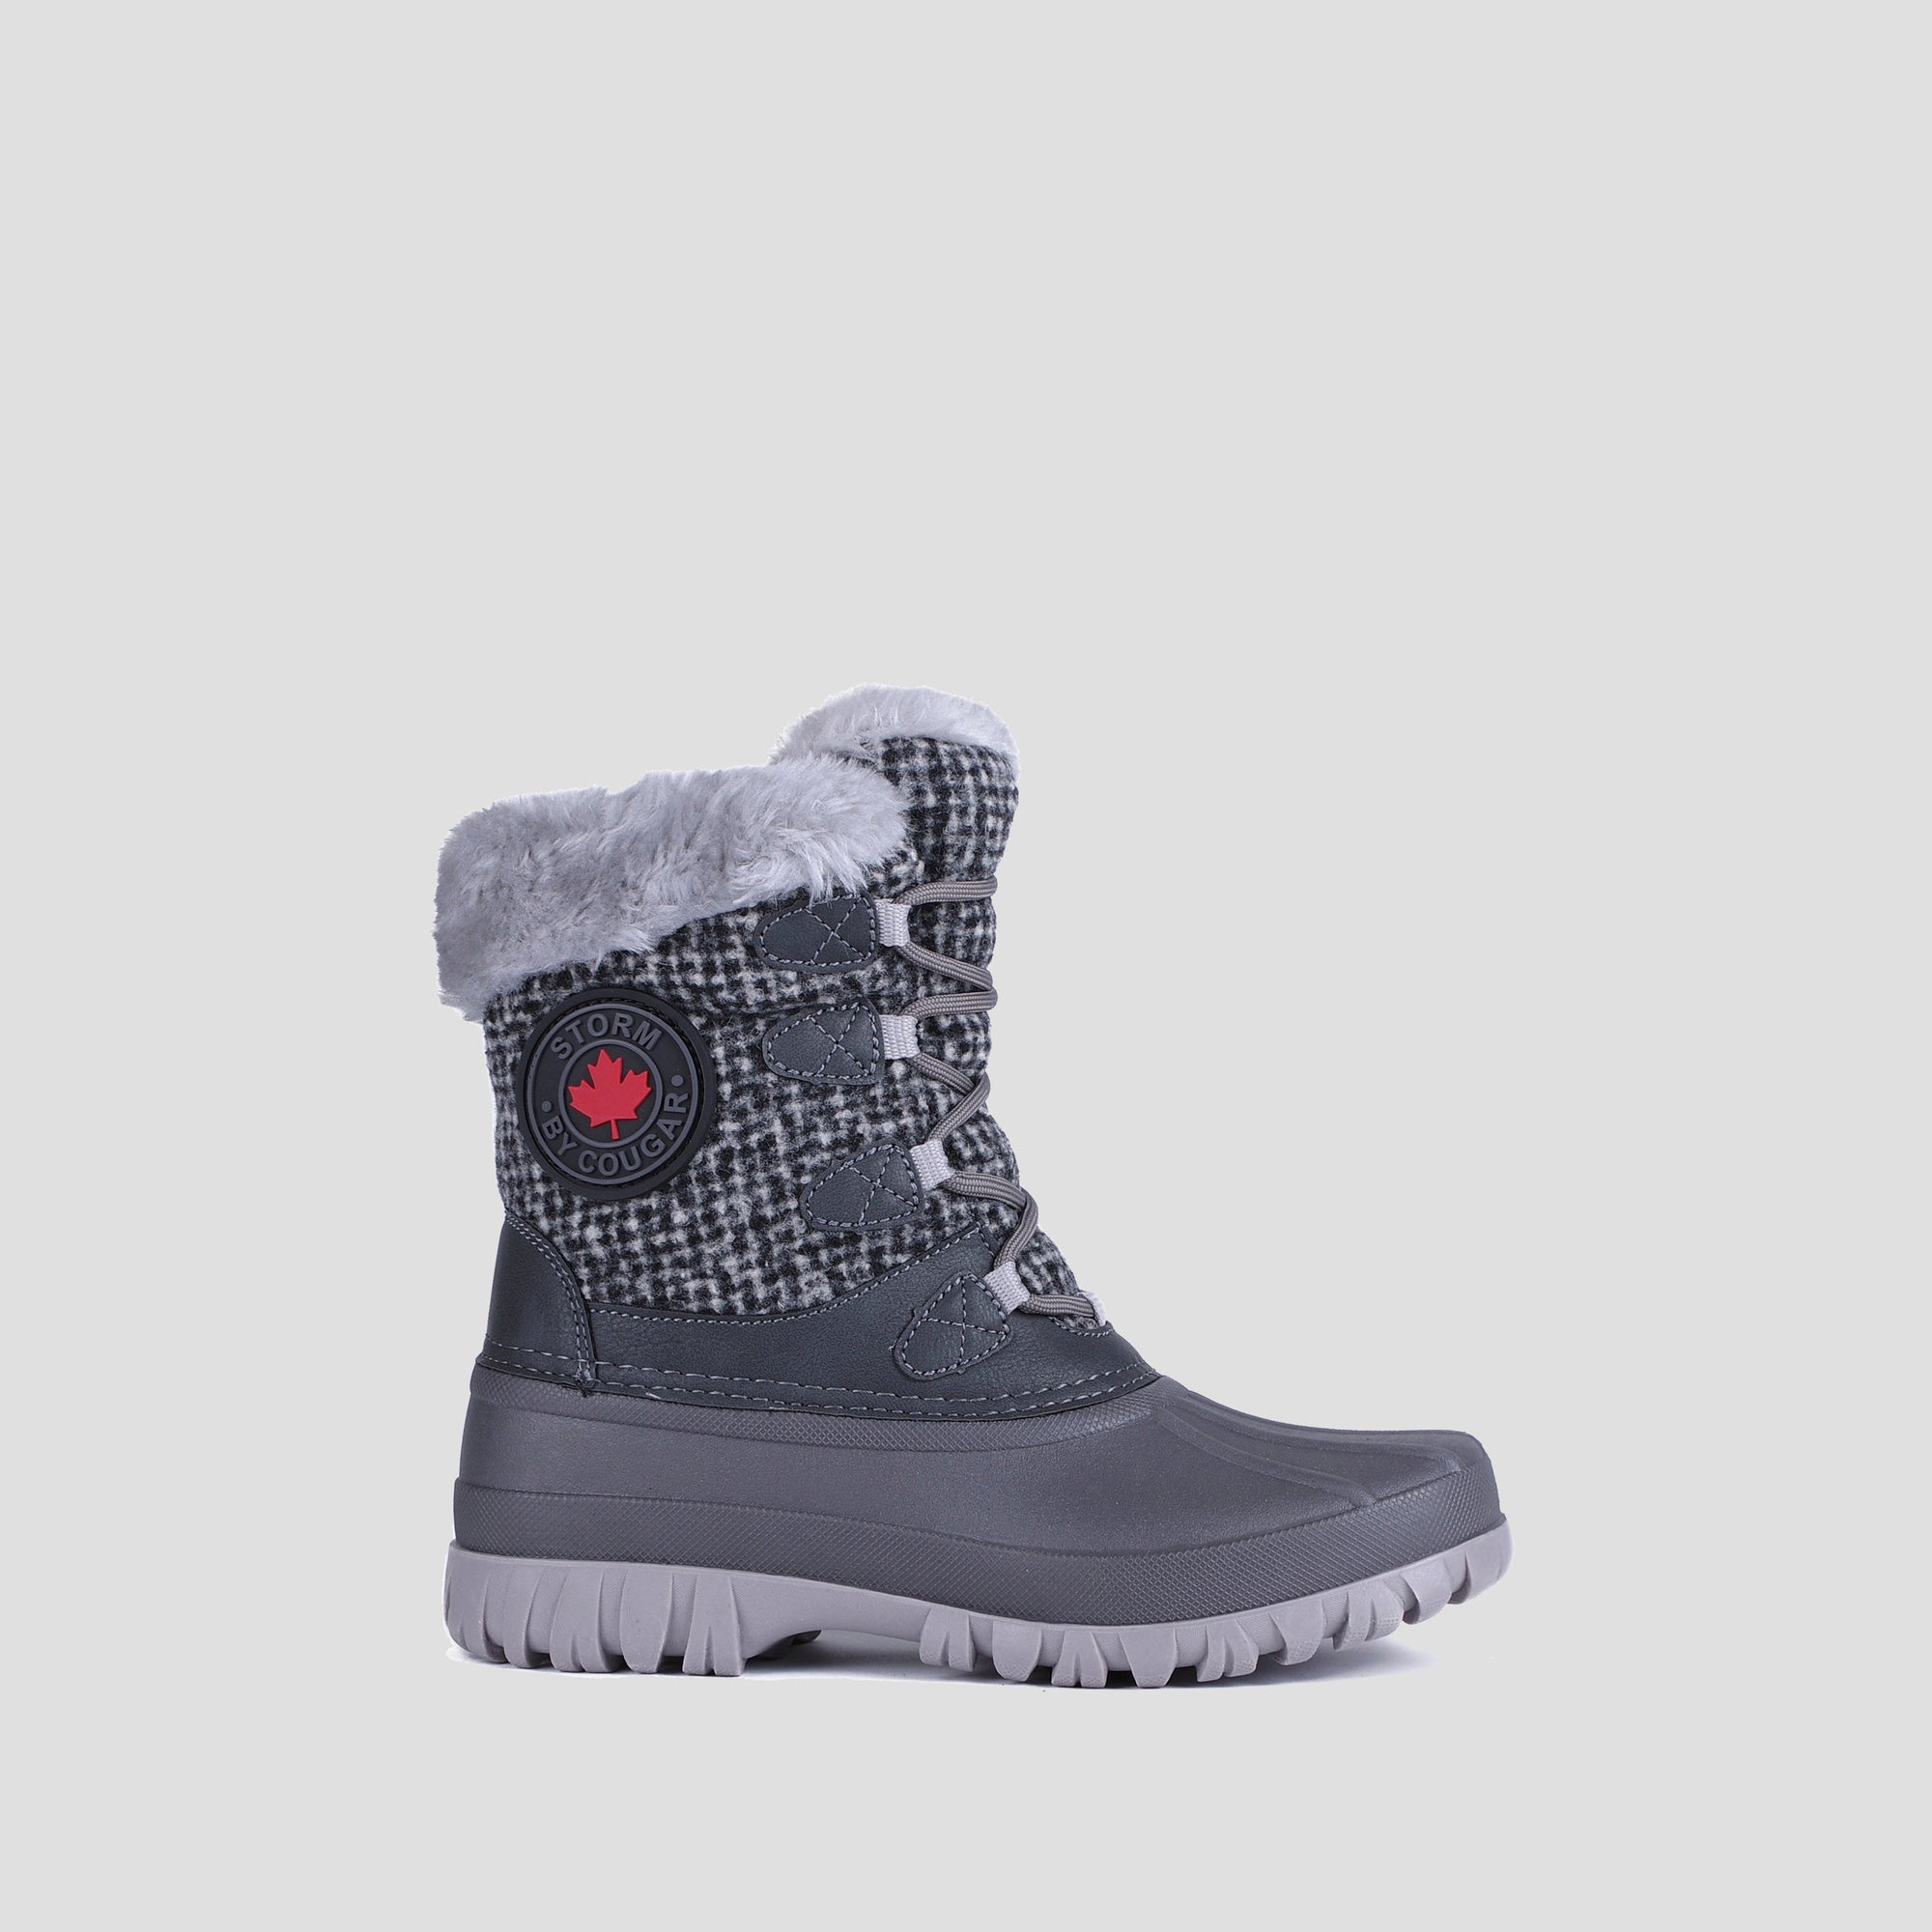 Cabin Brushed Tweed Textile Winter Boot - Color Charcoal